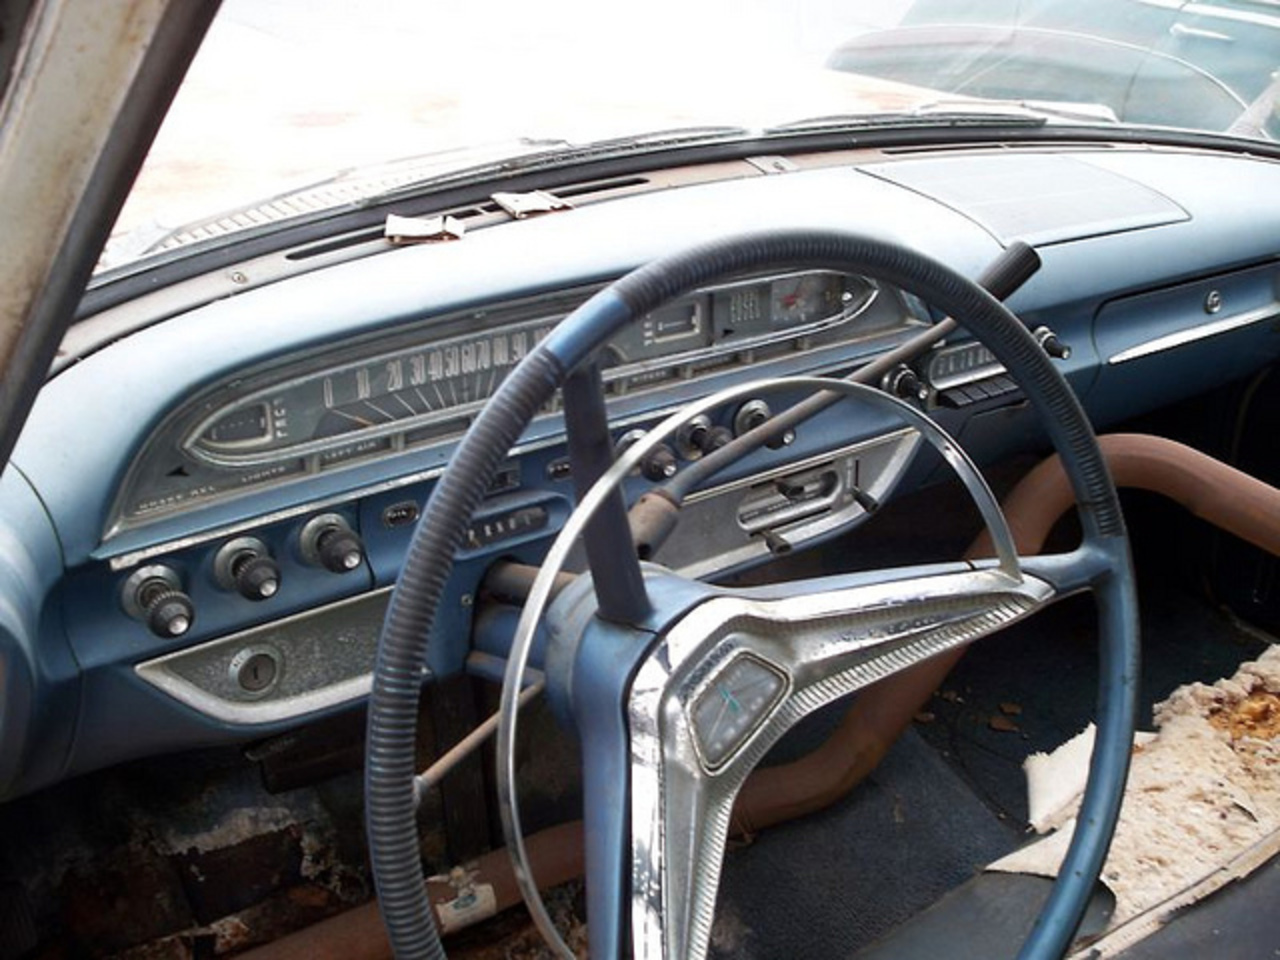 60 Edsel Ranger 4Dr Hardtop. One of 104 made with interior code of ...